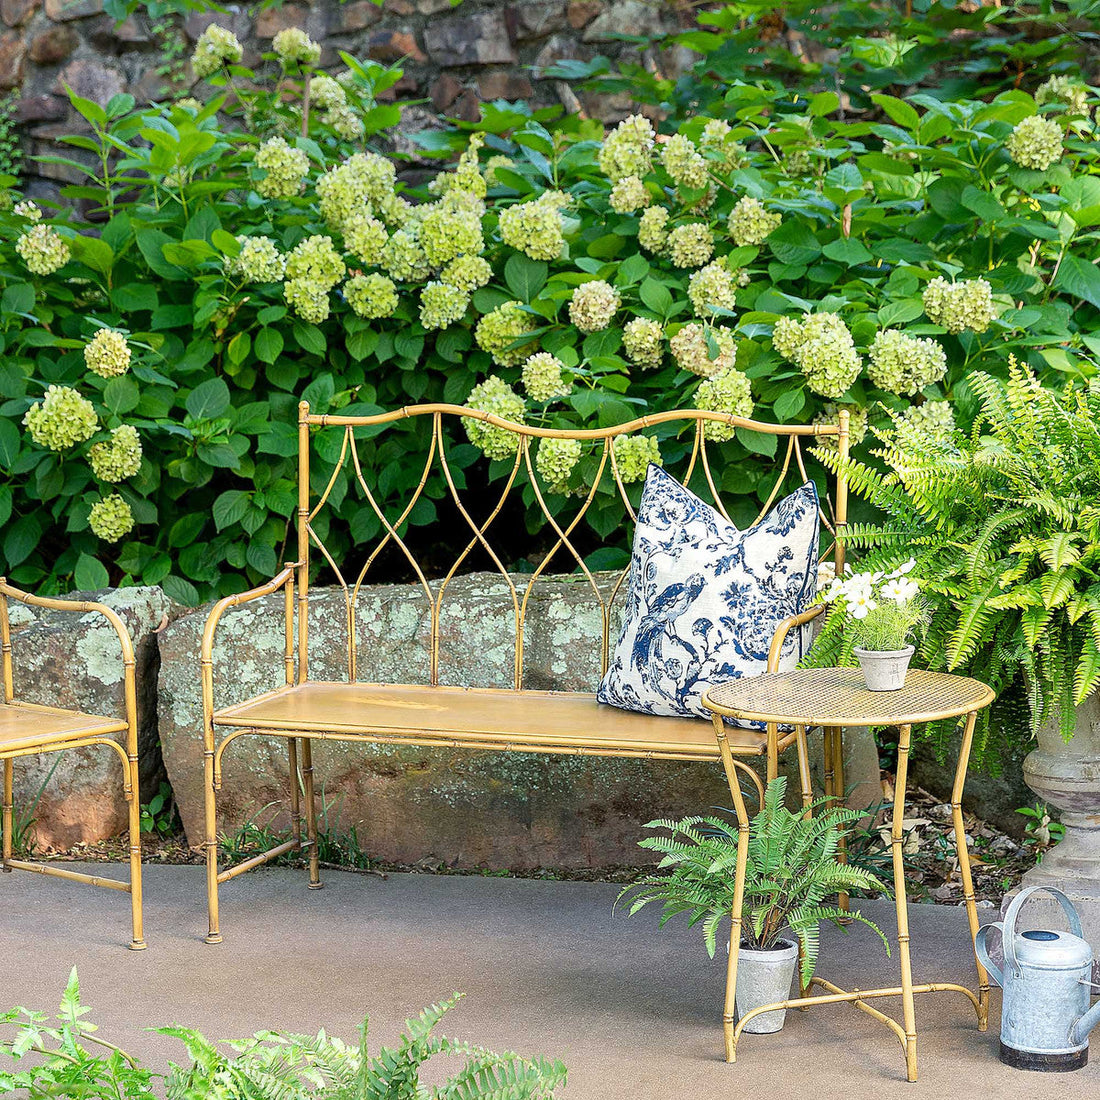 A cozy garden nook with a Park Hill Metal Bamboo Porch Bench, cushions, a side table, and lush greenery.